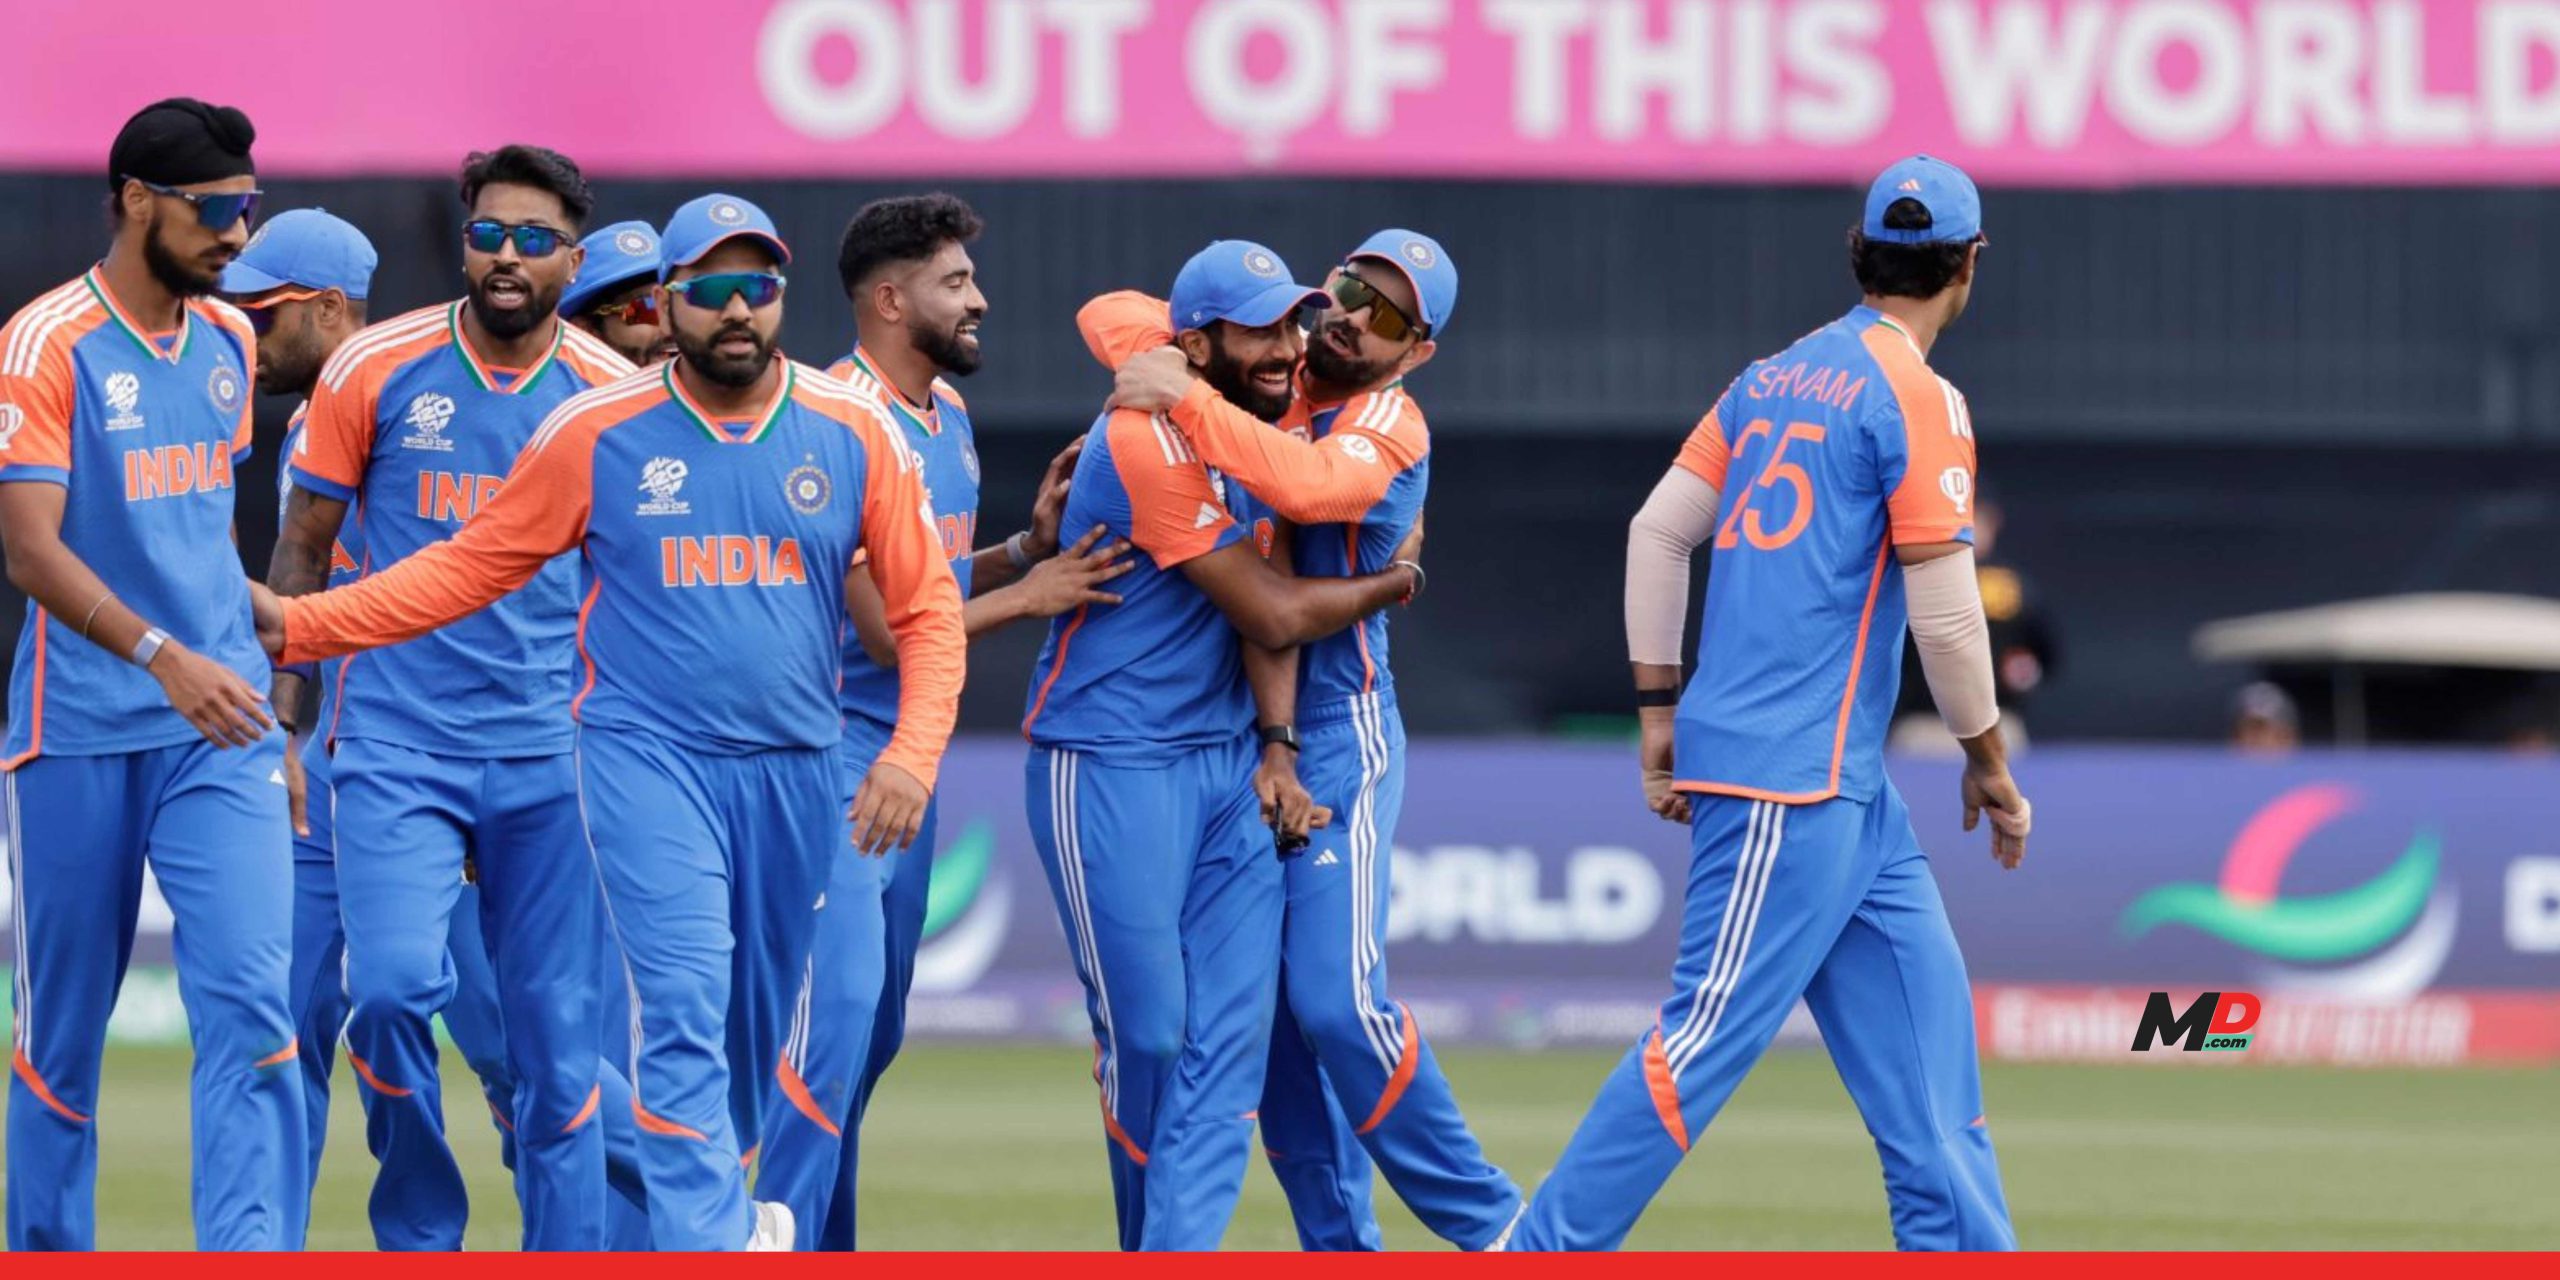 Surya shines bright as India clinch hard-fought victory against plucky USA